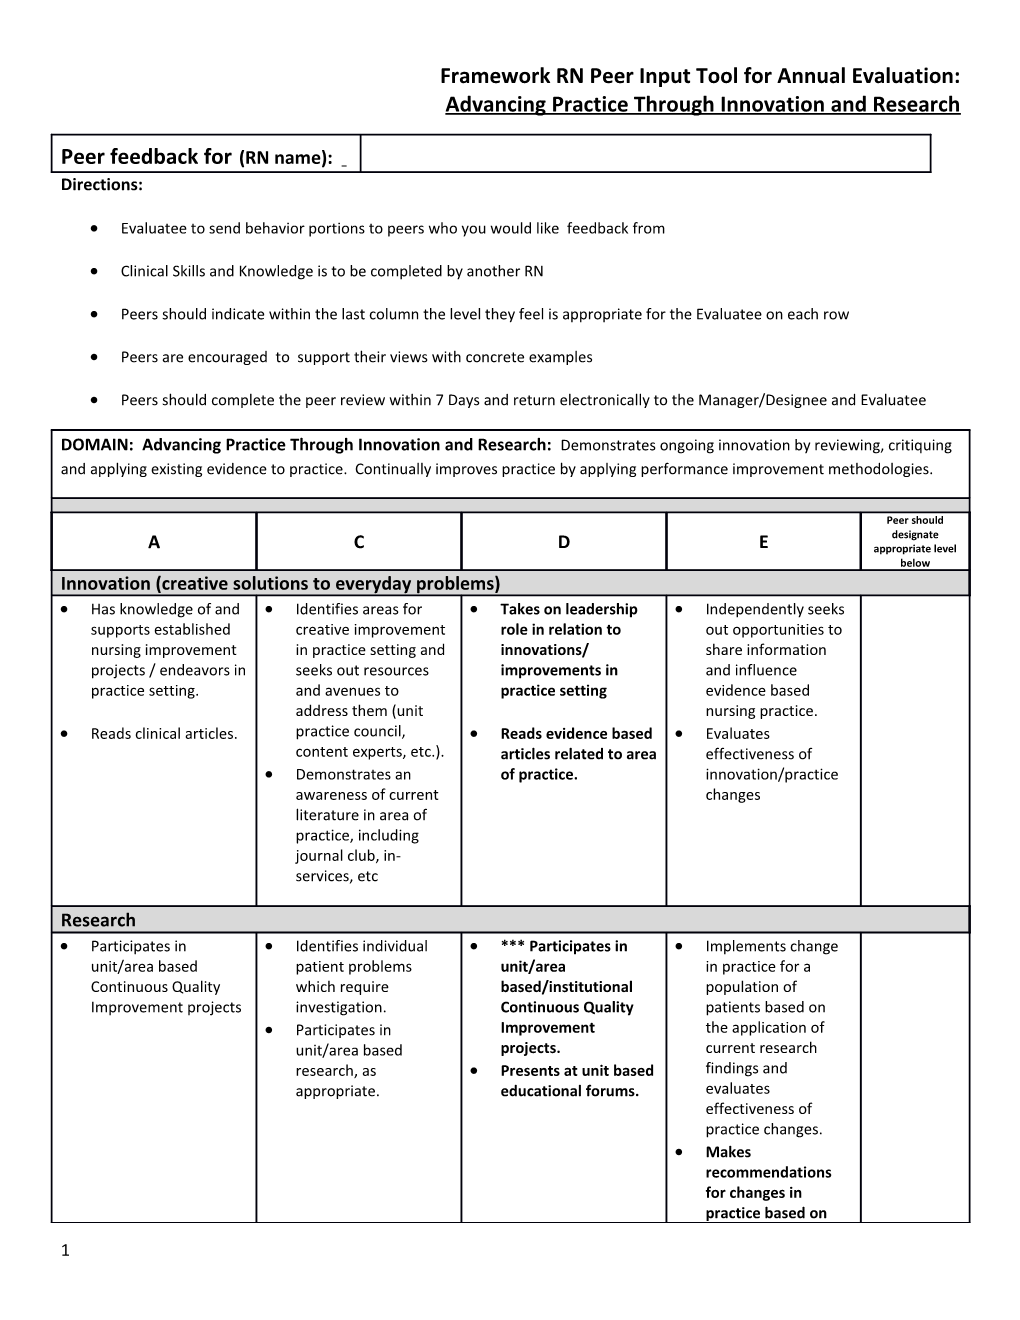 Framework RN Peer Input Tool for Annual Evaluation: Advancing Practice Through Innovation